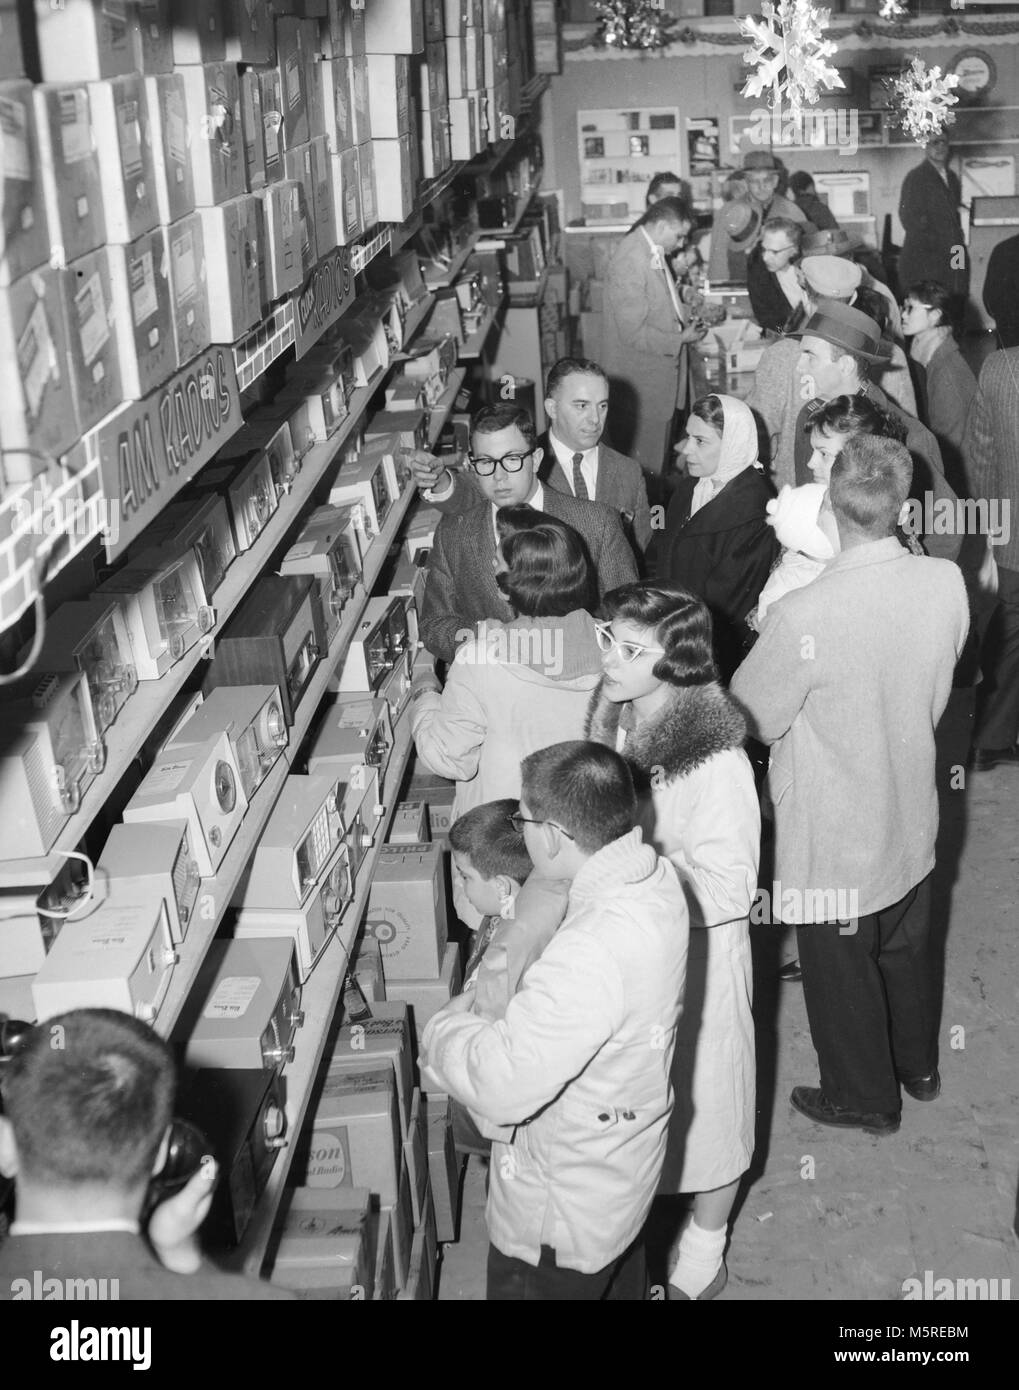 Christmas shopping frenzy at a Chicago-area Polk Brothers store, ca. 1960. Stock Photo